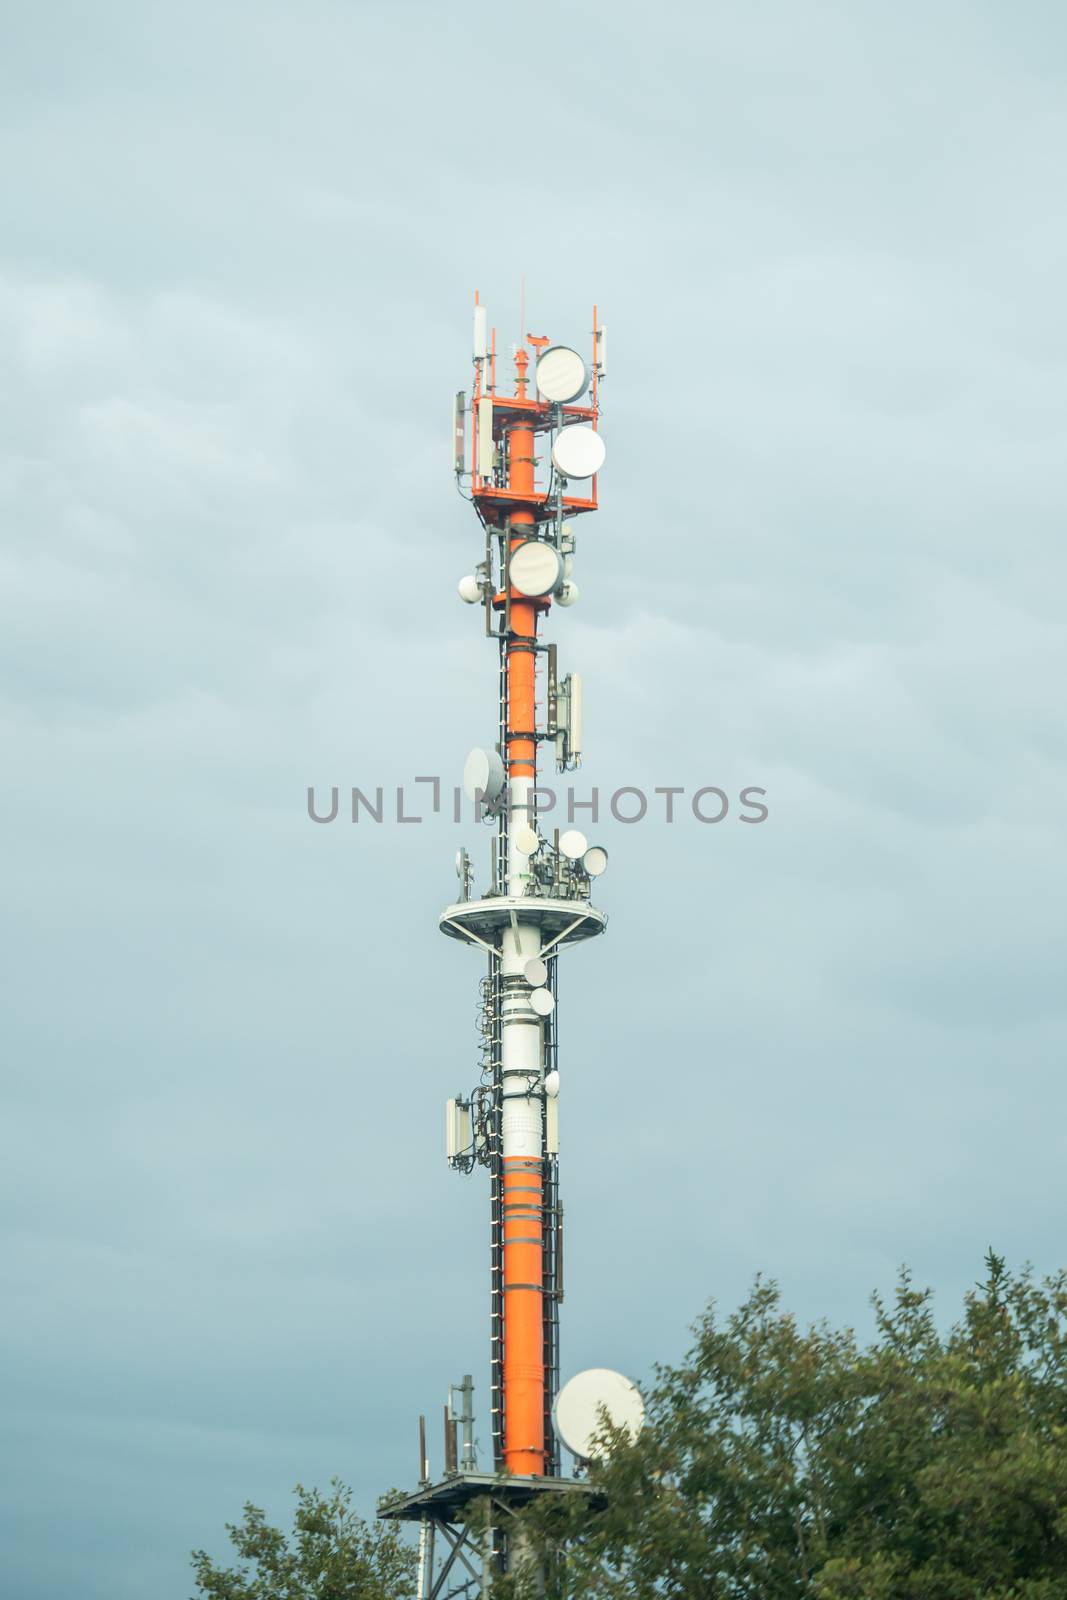 A huge radio tower with sky and clouds in the background